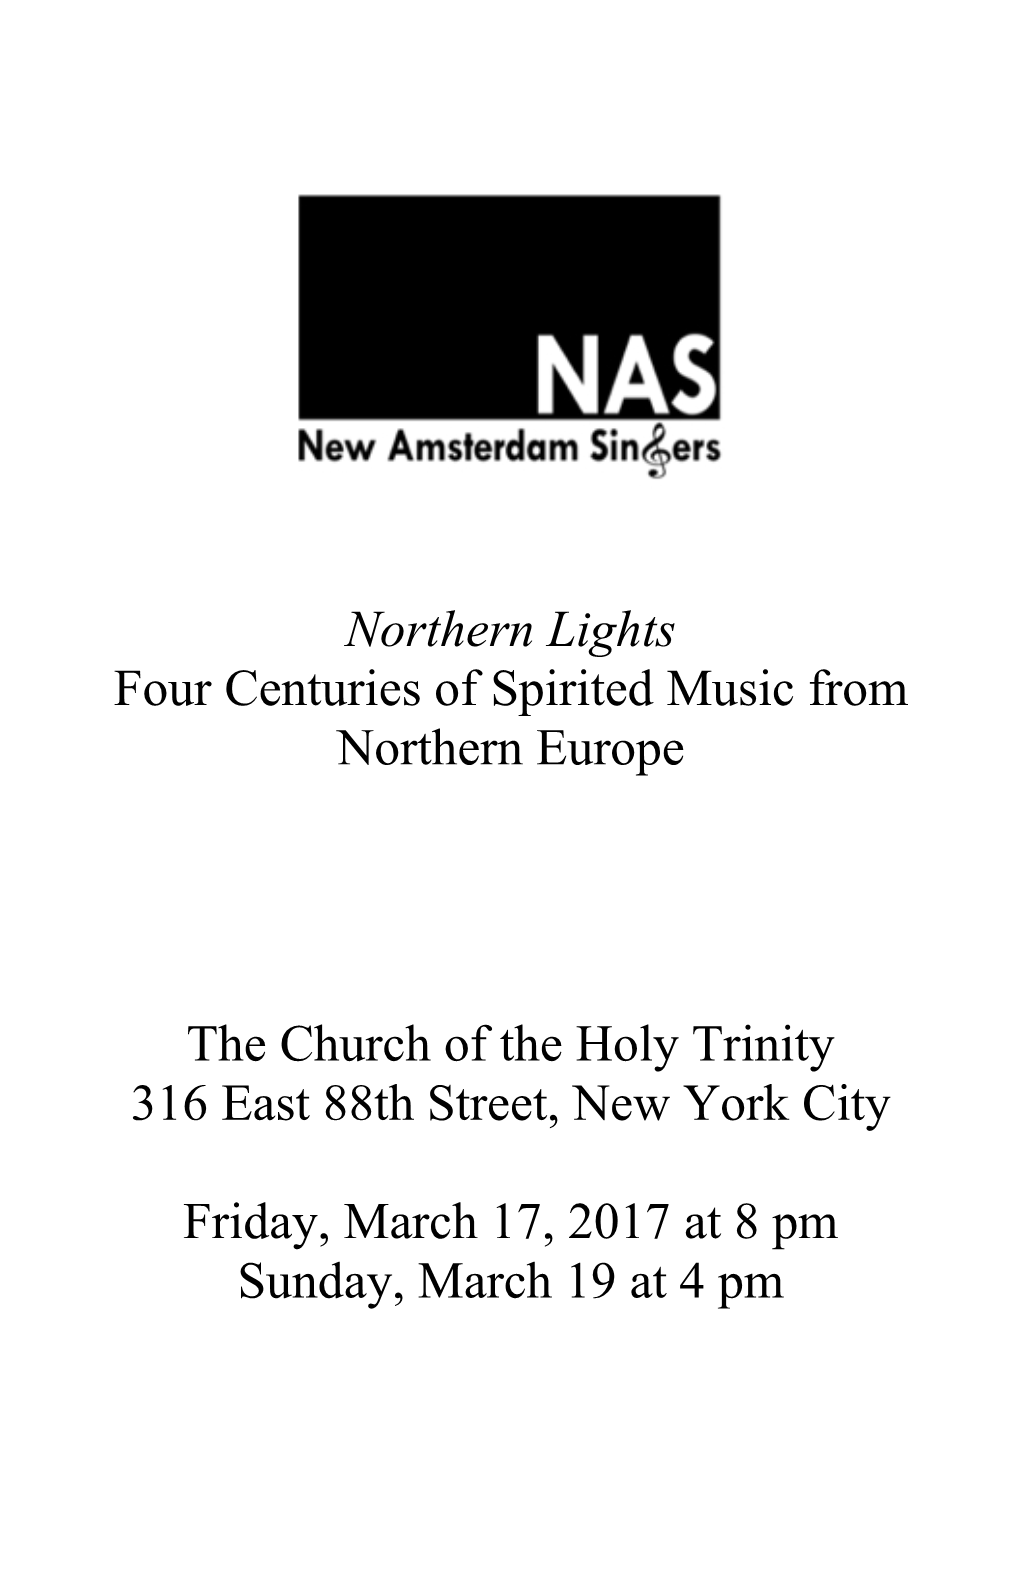 Northern Lights Four Centuries of Spirited Music from Northern Europe